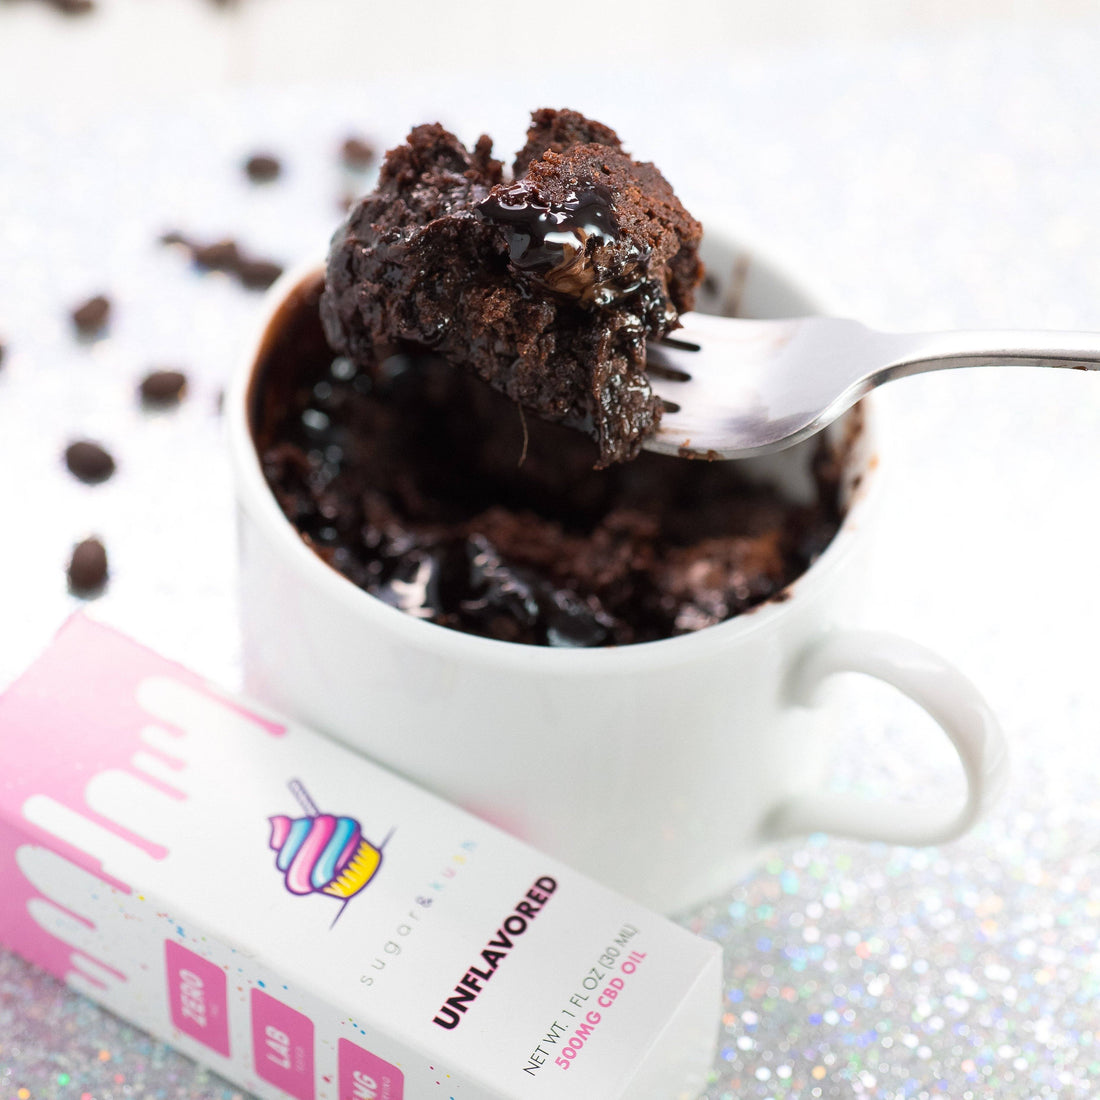 Heavenly Fudge Pudding Cake from our best CBD Recipes at Sugar and Kush CBD Oil